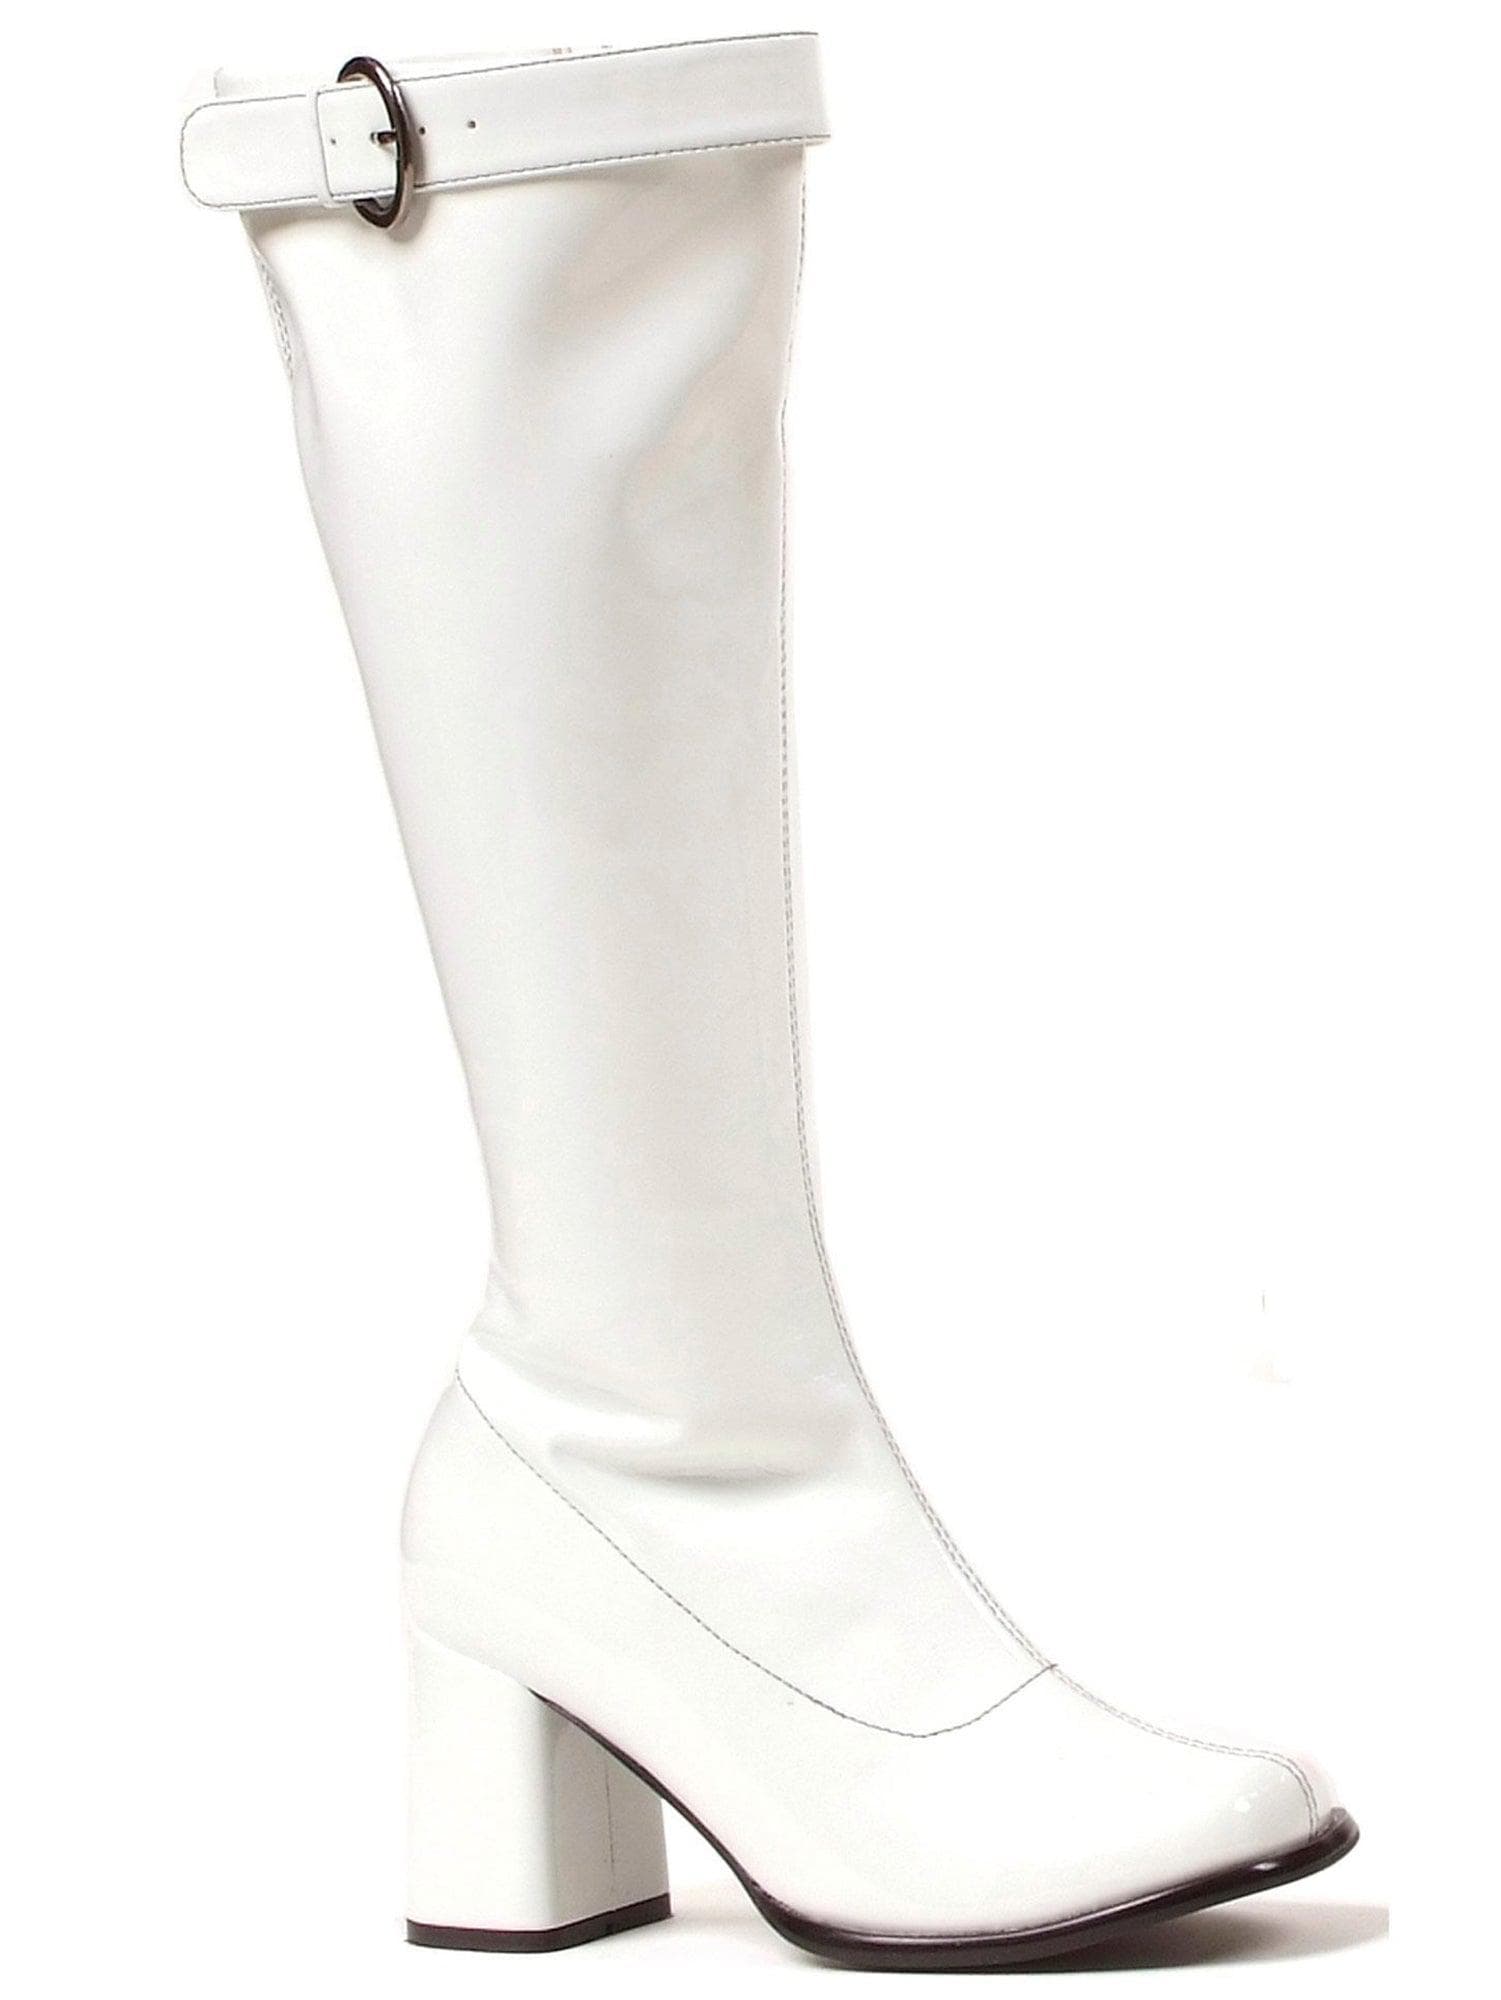 Adult White Wide Width/Calf Patent Go Go Boots - costumes.com